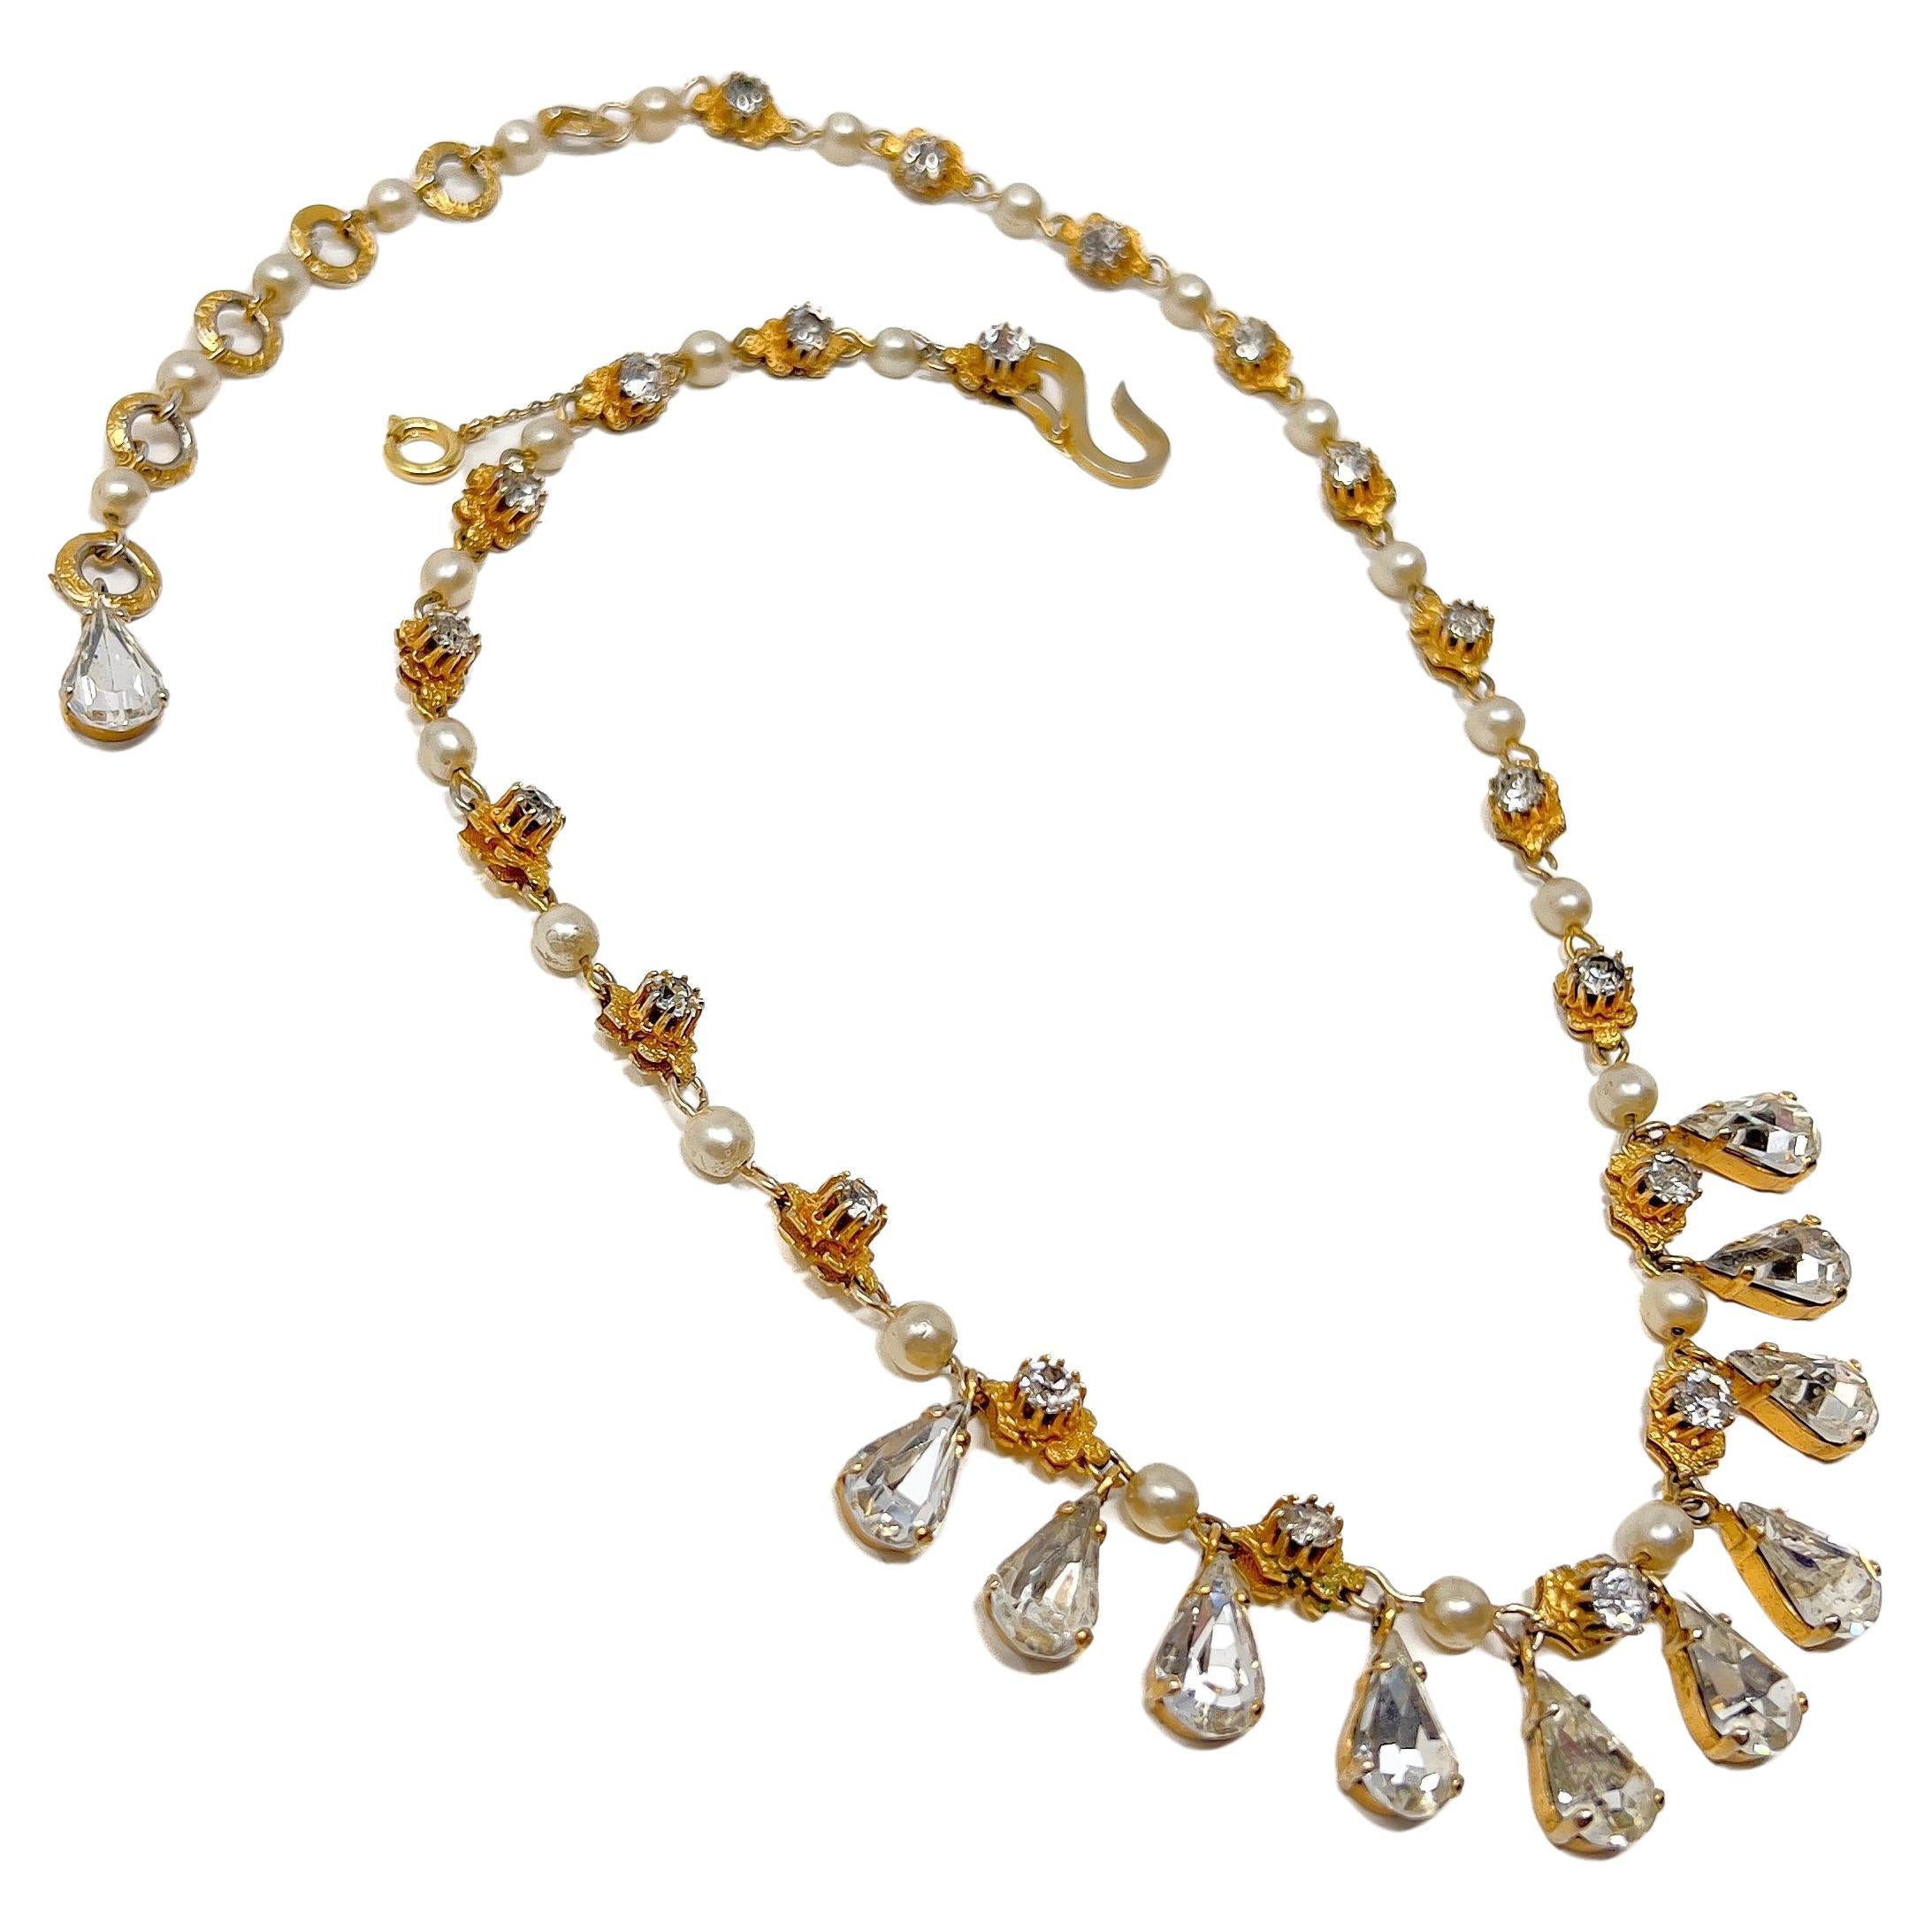 Christian Dior by Mitchel Maer 1952-1956 Vintage Rhinestone and Pearl Necklace For Sale